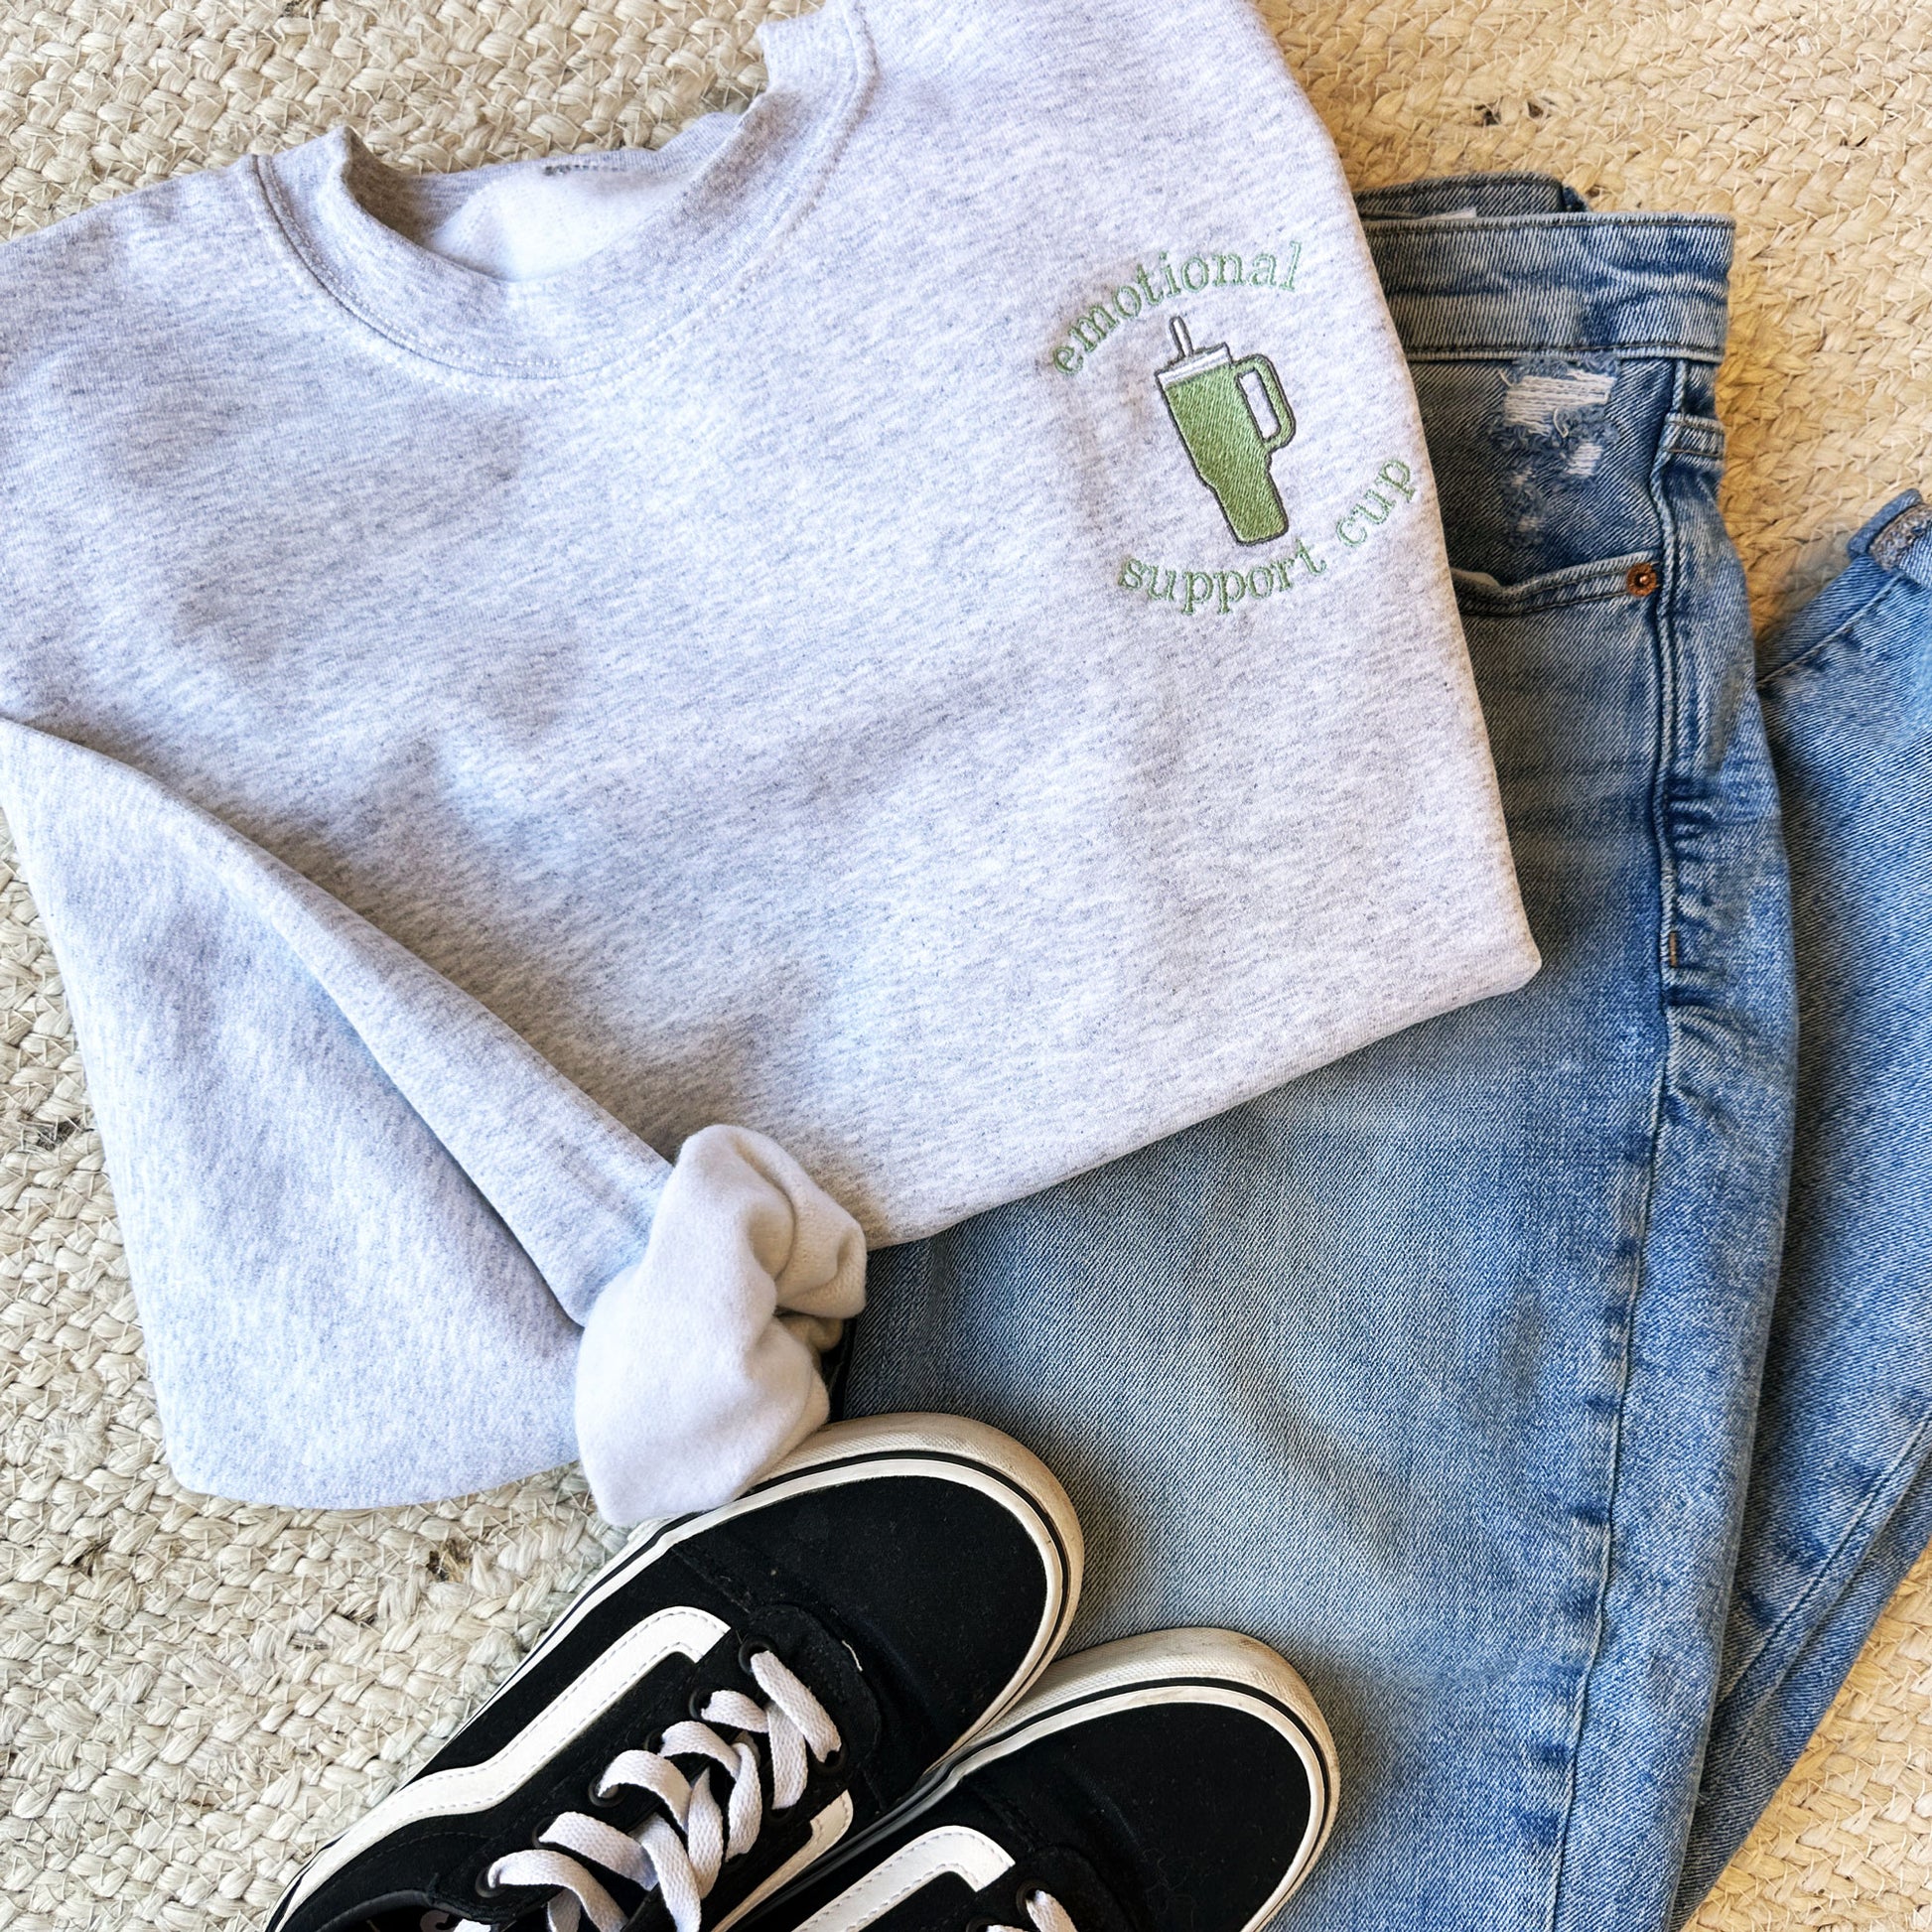 image of an outfit featuring black vans, blue jeans, and an ash gray sweatshirt with a tumbler embroidered design